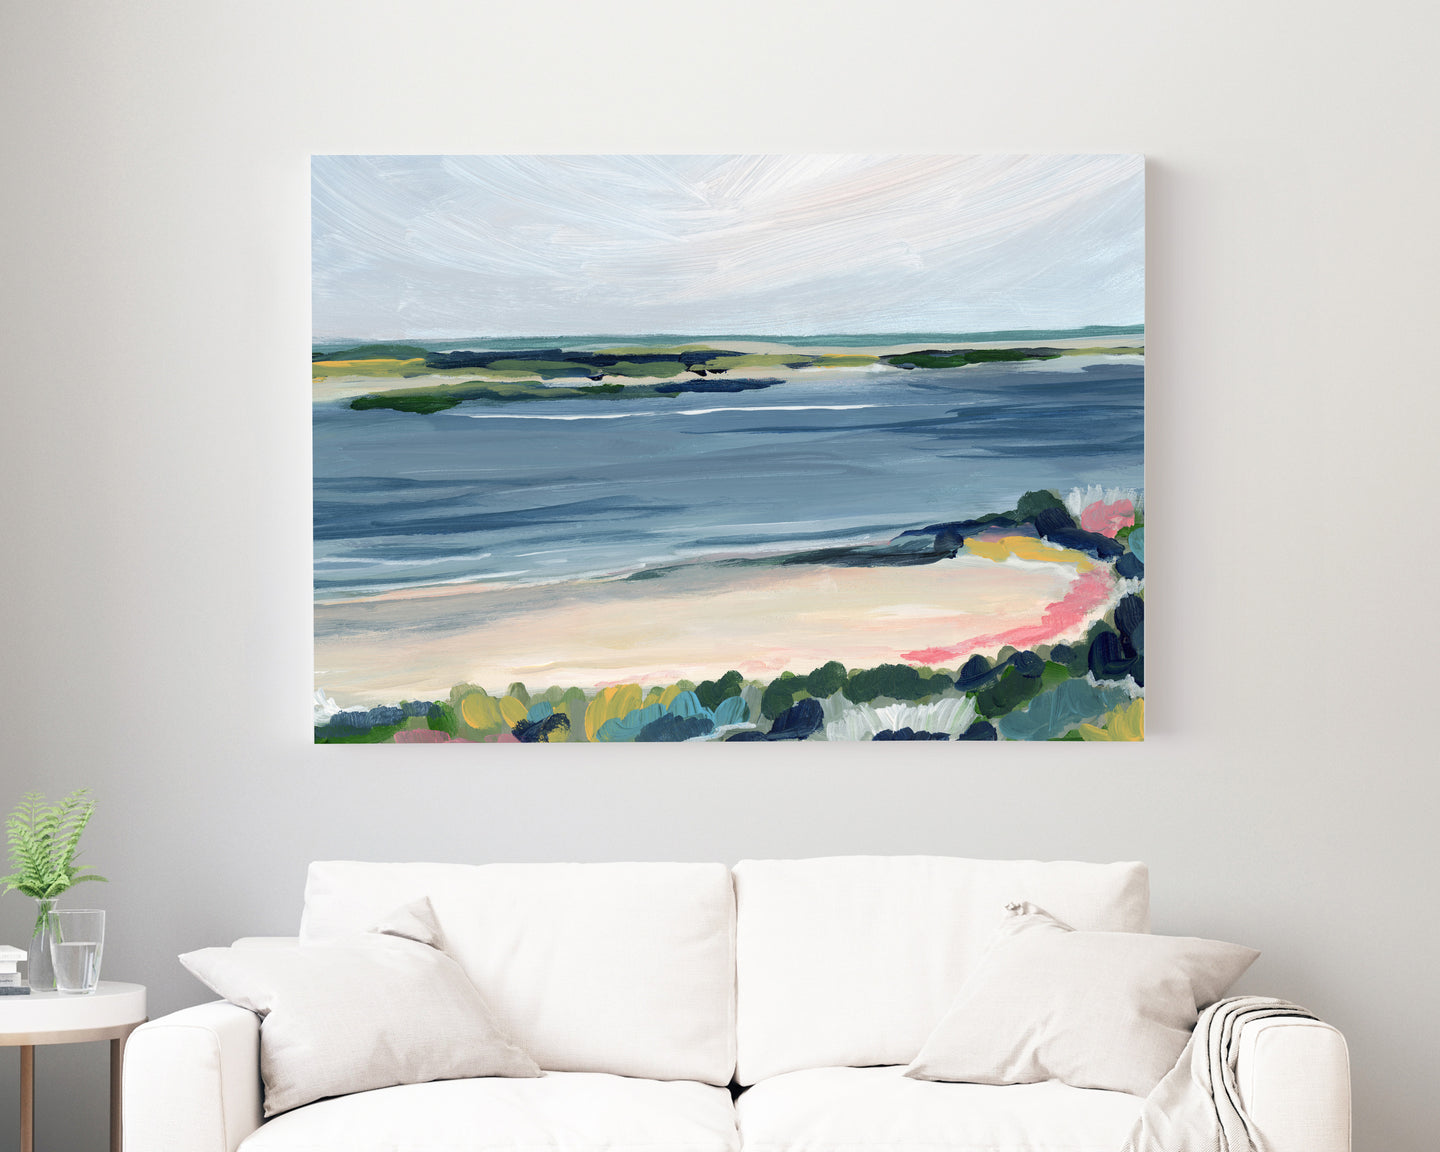 Chatham Bars North Beach Island on Gallery Wrapped Canvas